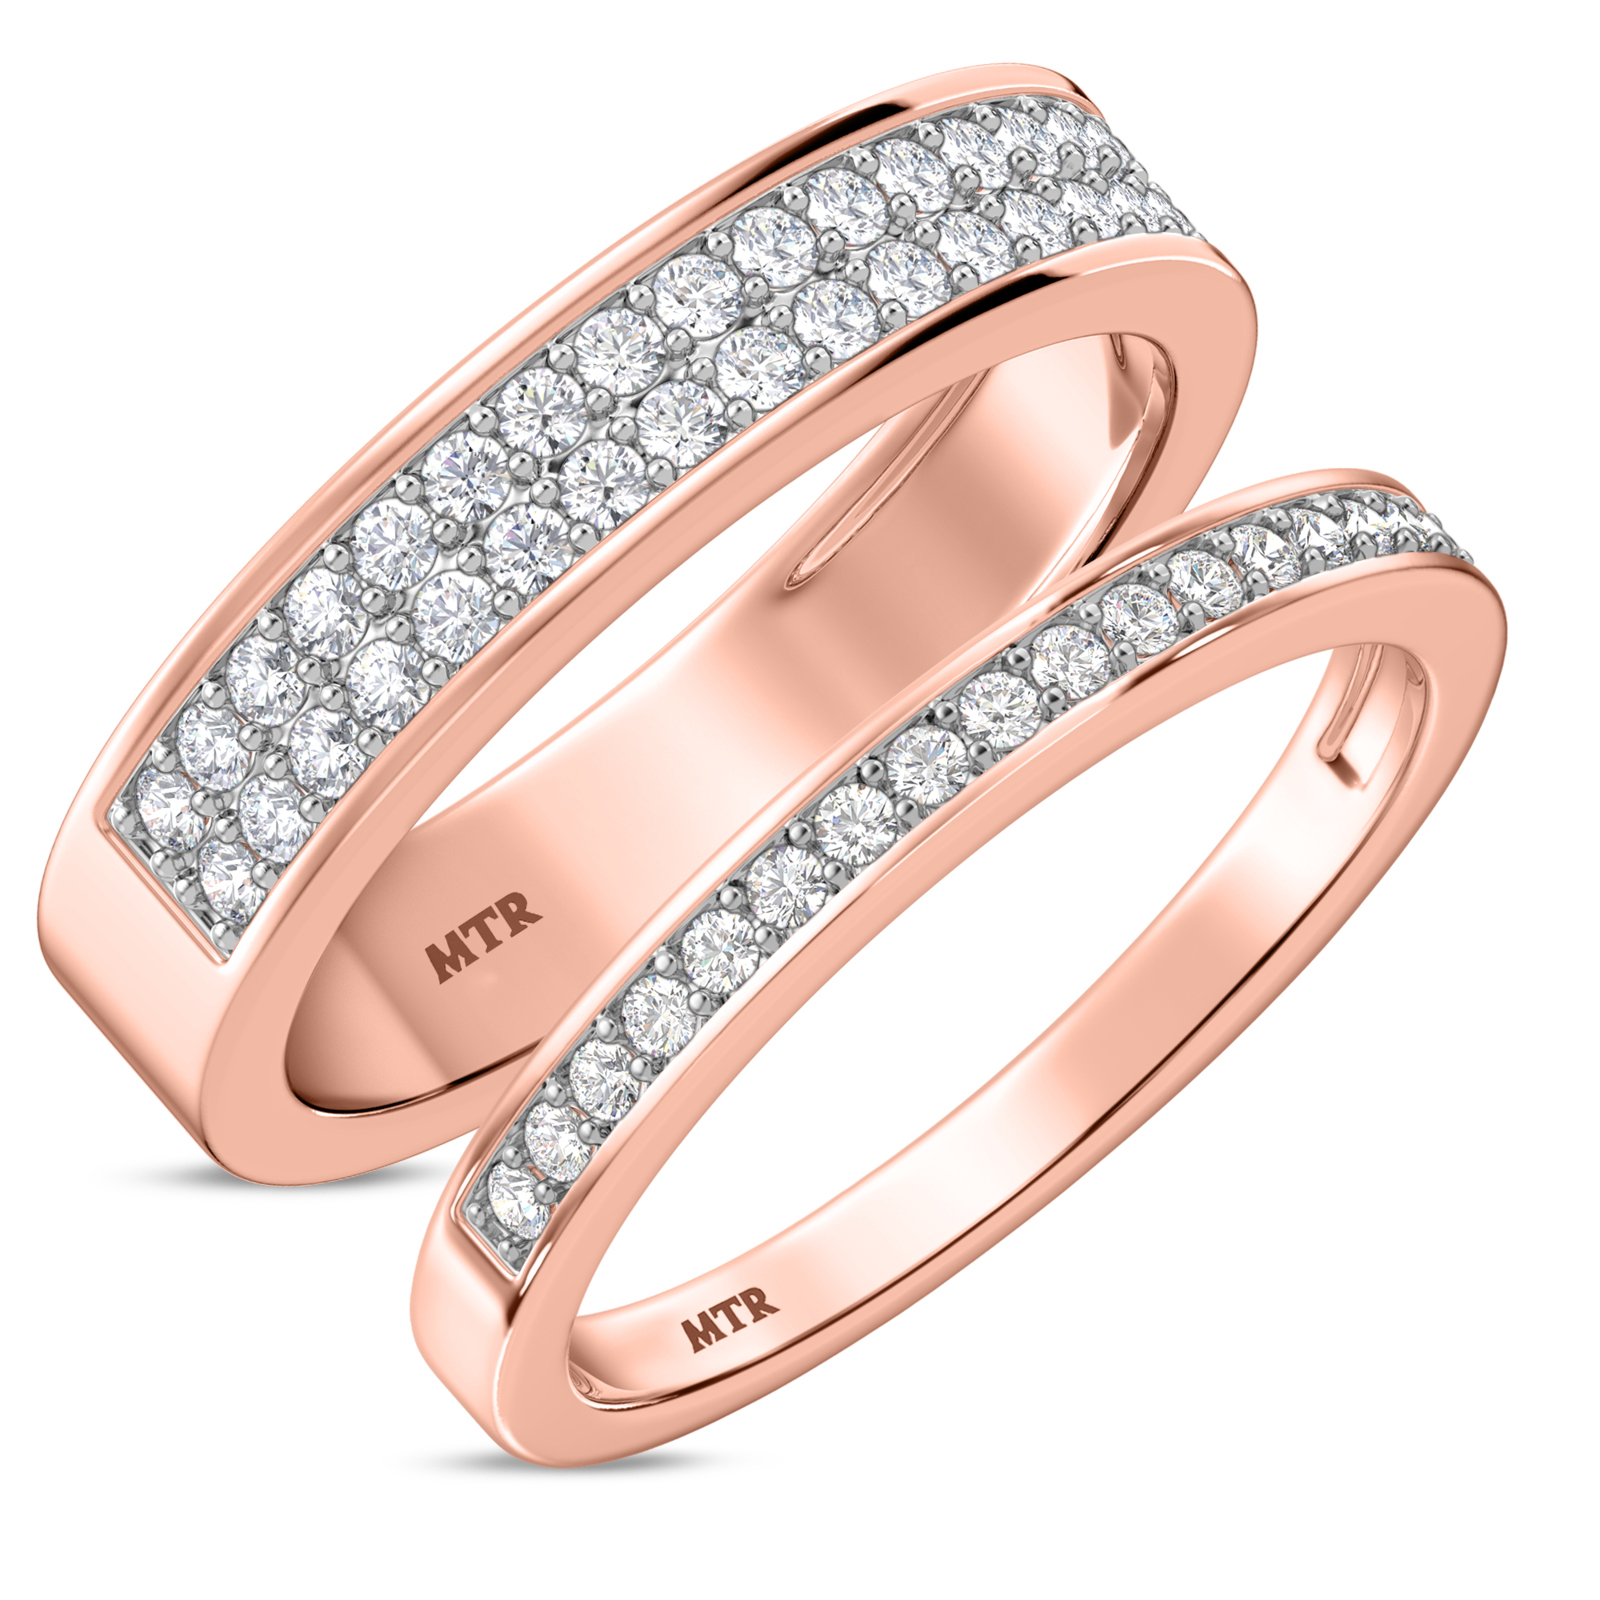 His and Hers Wedding Rings Set Sterling Silver Black Wedding Band for Him  Her 14/10 - Walmart.com